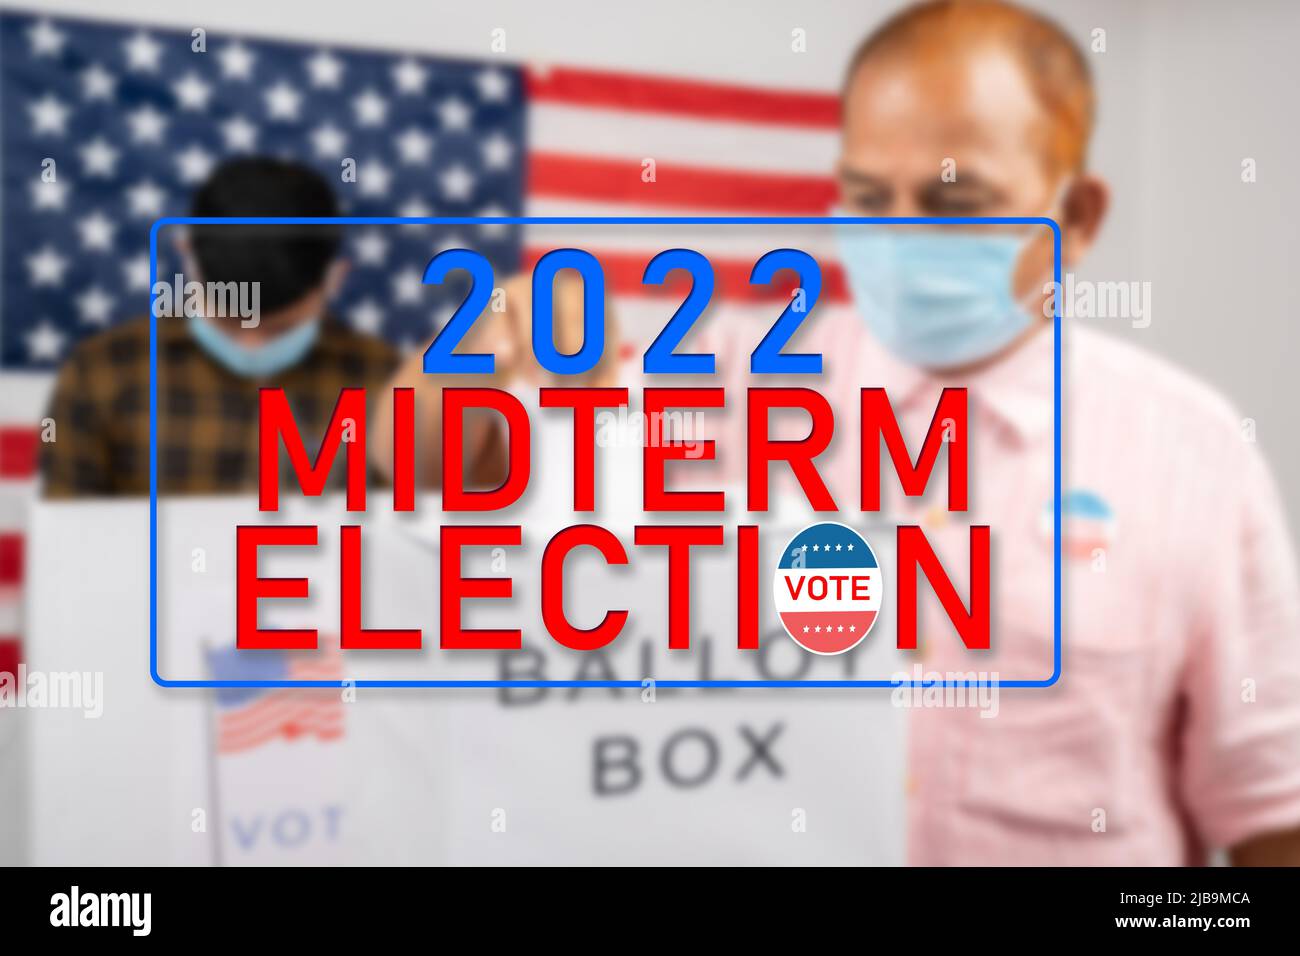 Concept of 2022 Midterm election showing by Man in medical mask placing ballot paper inside the ballot box at polling booth. Stock Photo